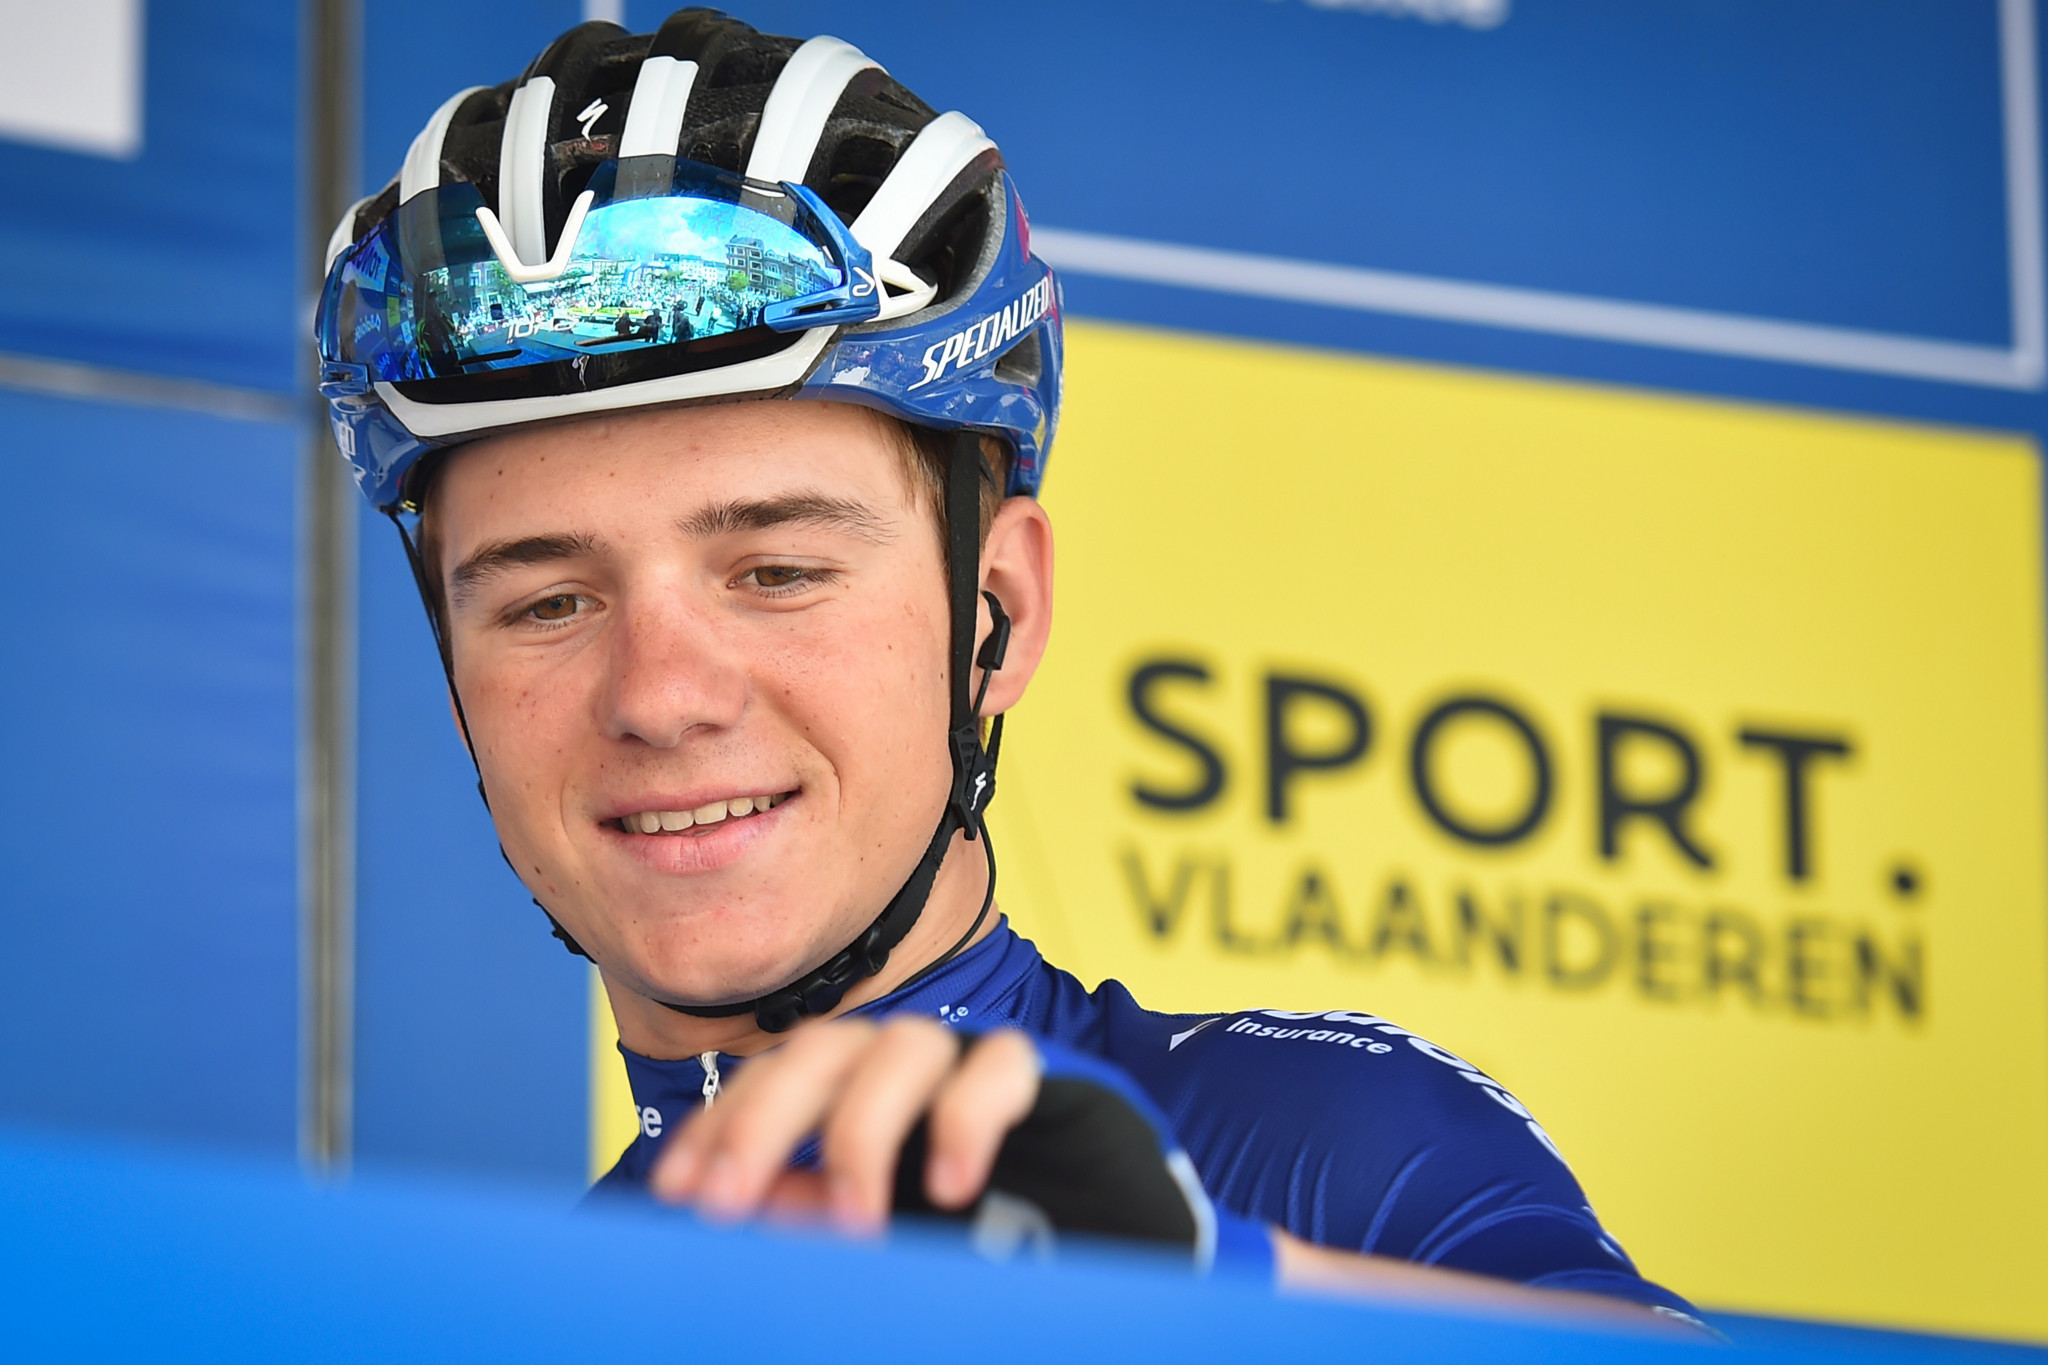 Remco Evenepoel earned a solo stage win to assume the race lead at the Tour de Pologne ©Getty Images